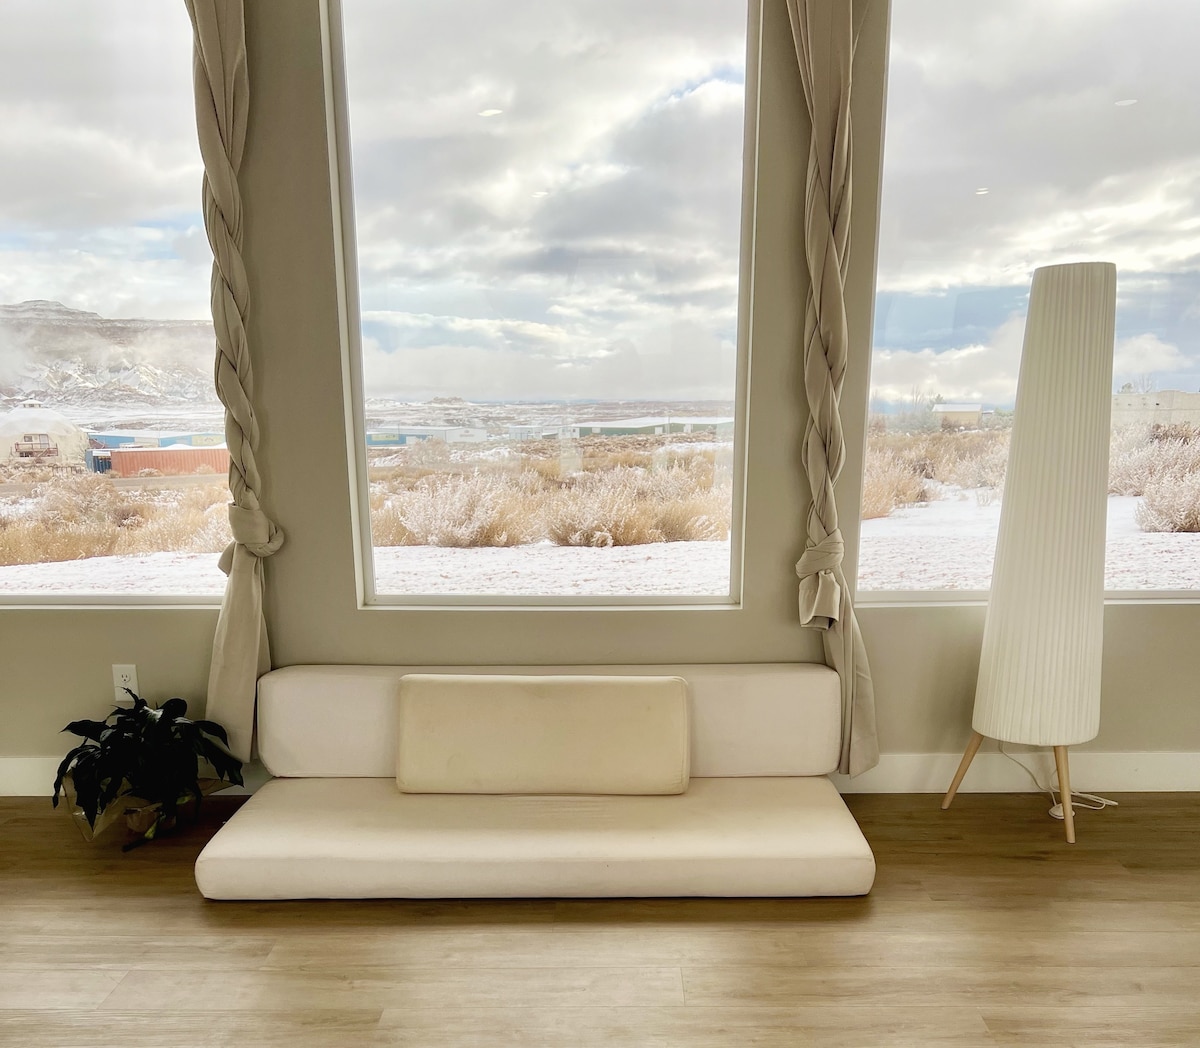 Oasis Suite with Canyon Mesa View near Lake Powell